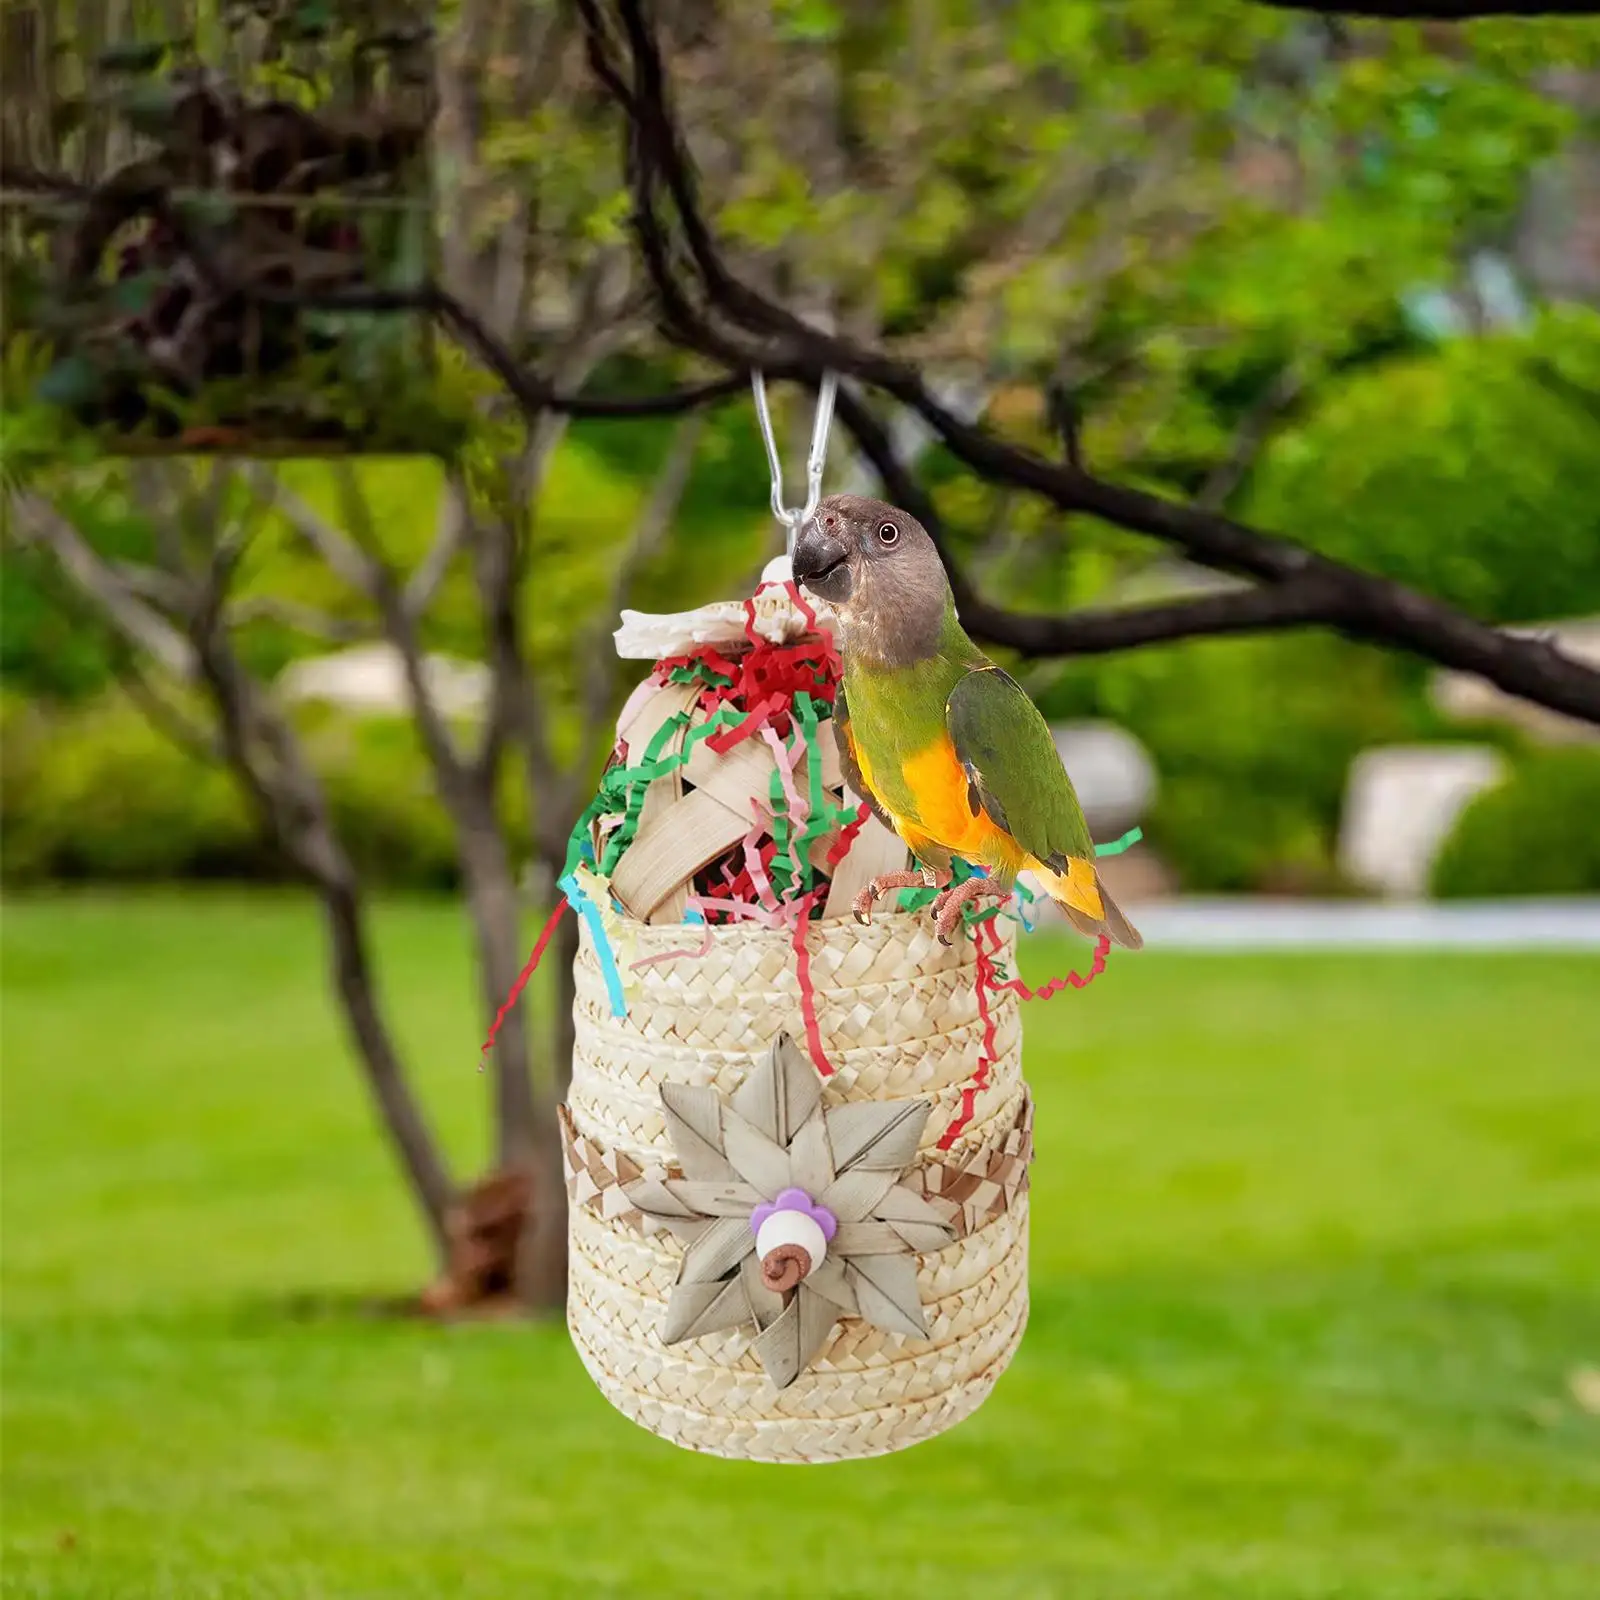 Bird Chewing Toy Decorative Funny Bird Parrot Toy for Macaw Finches Training